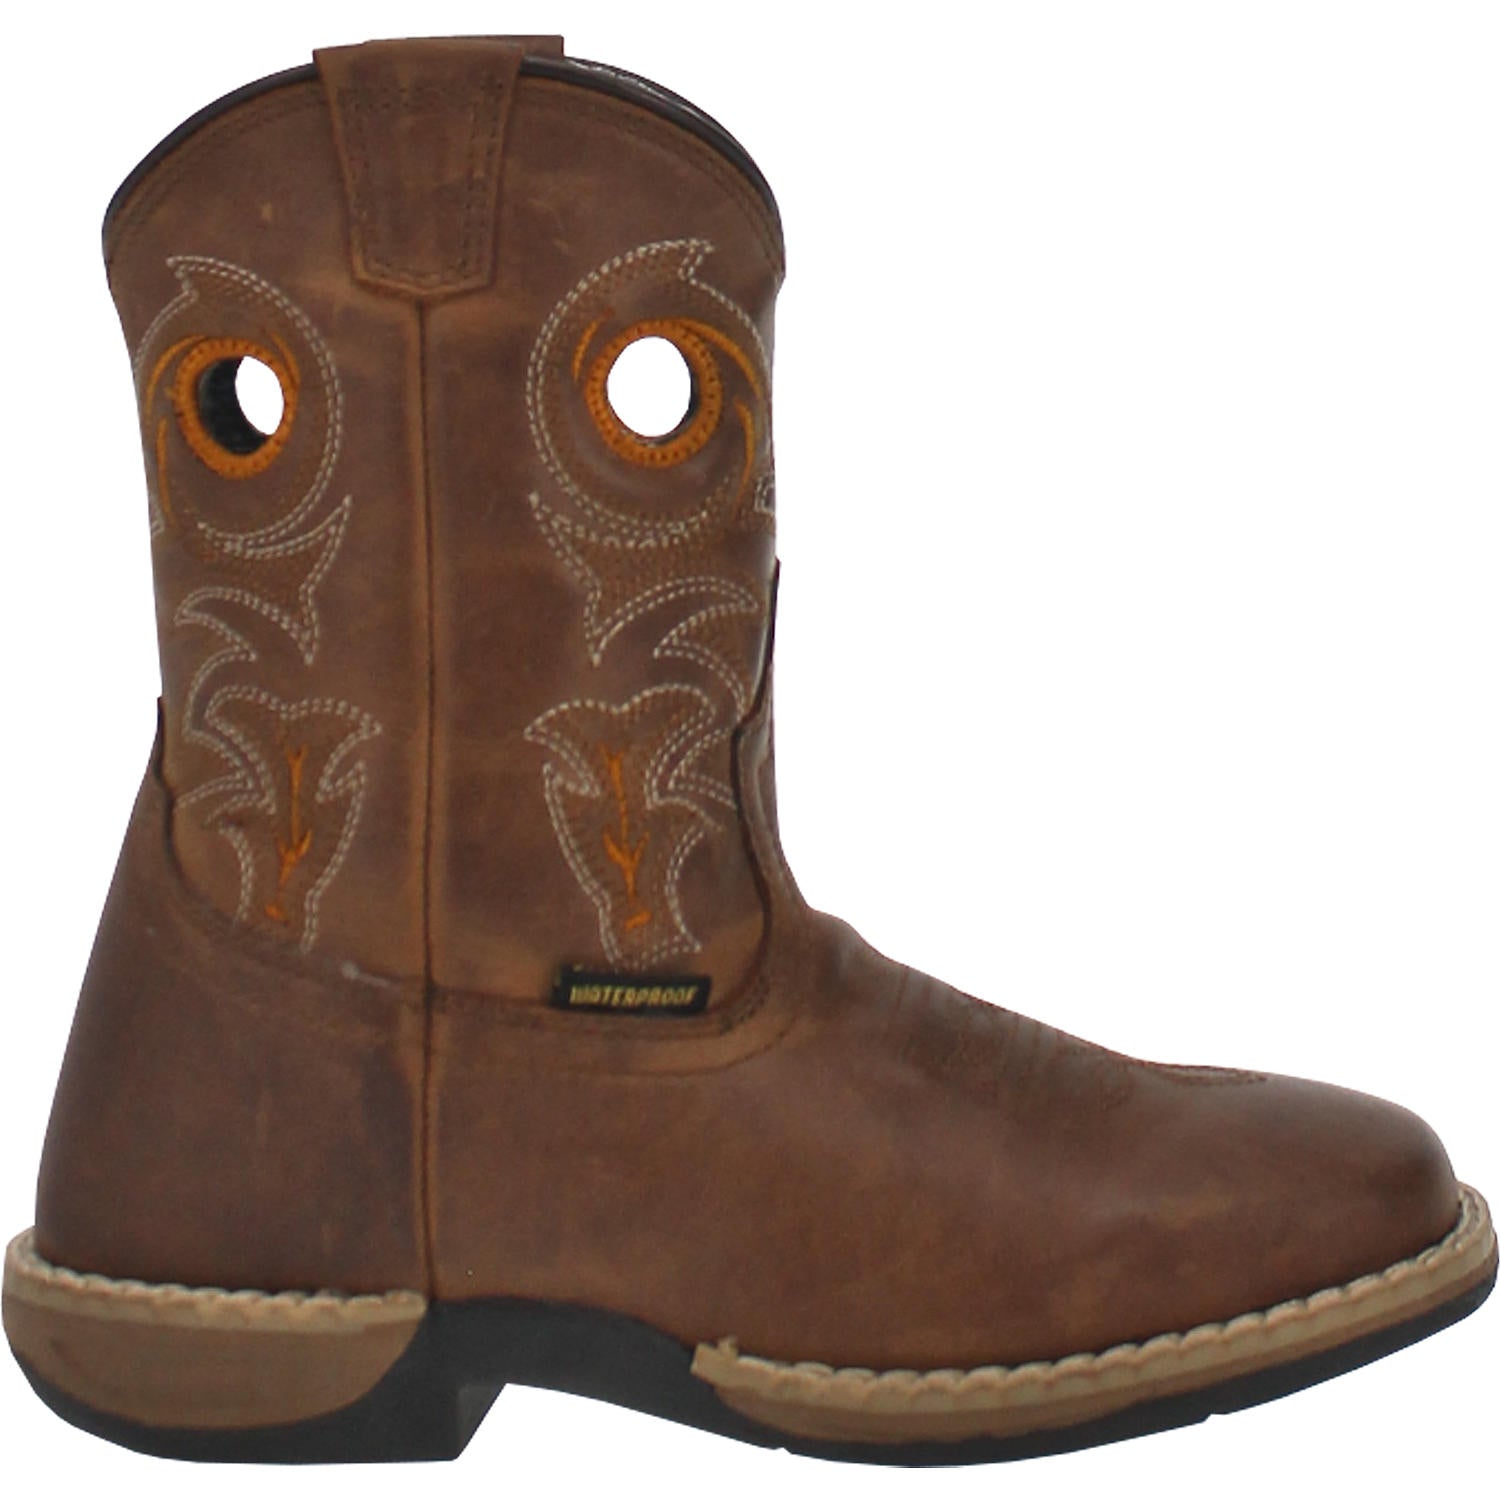 Storm Eye Brown Children's Leather Boots (DS)